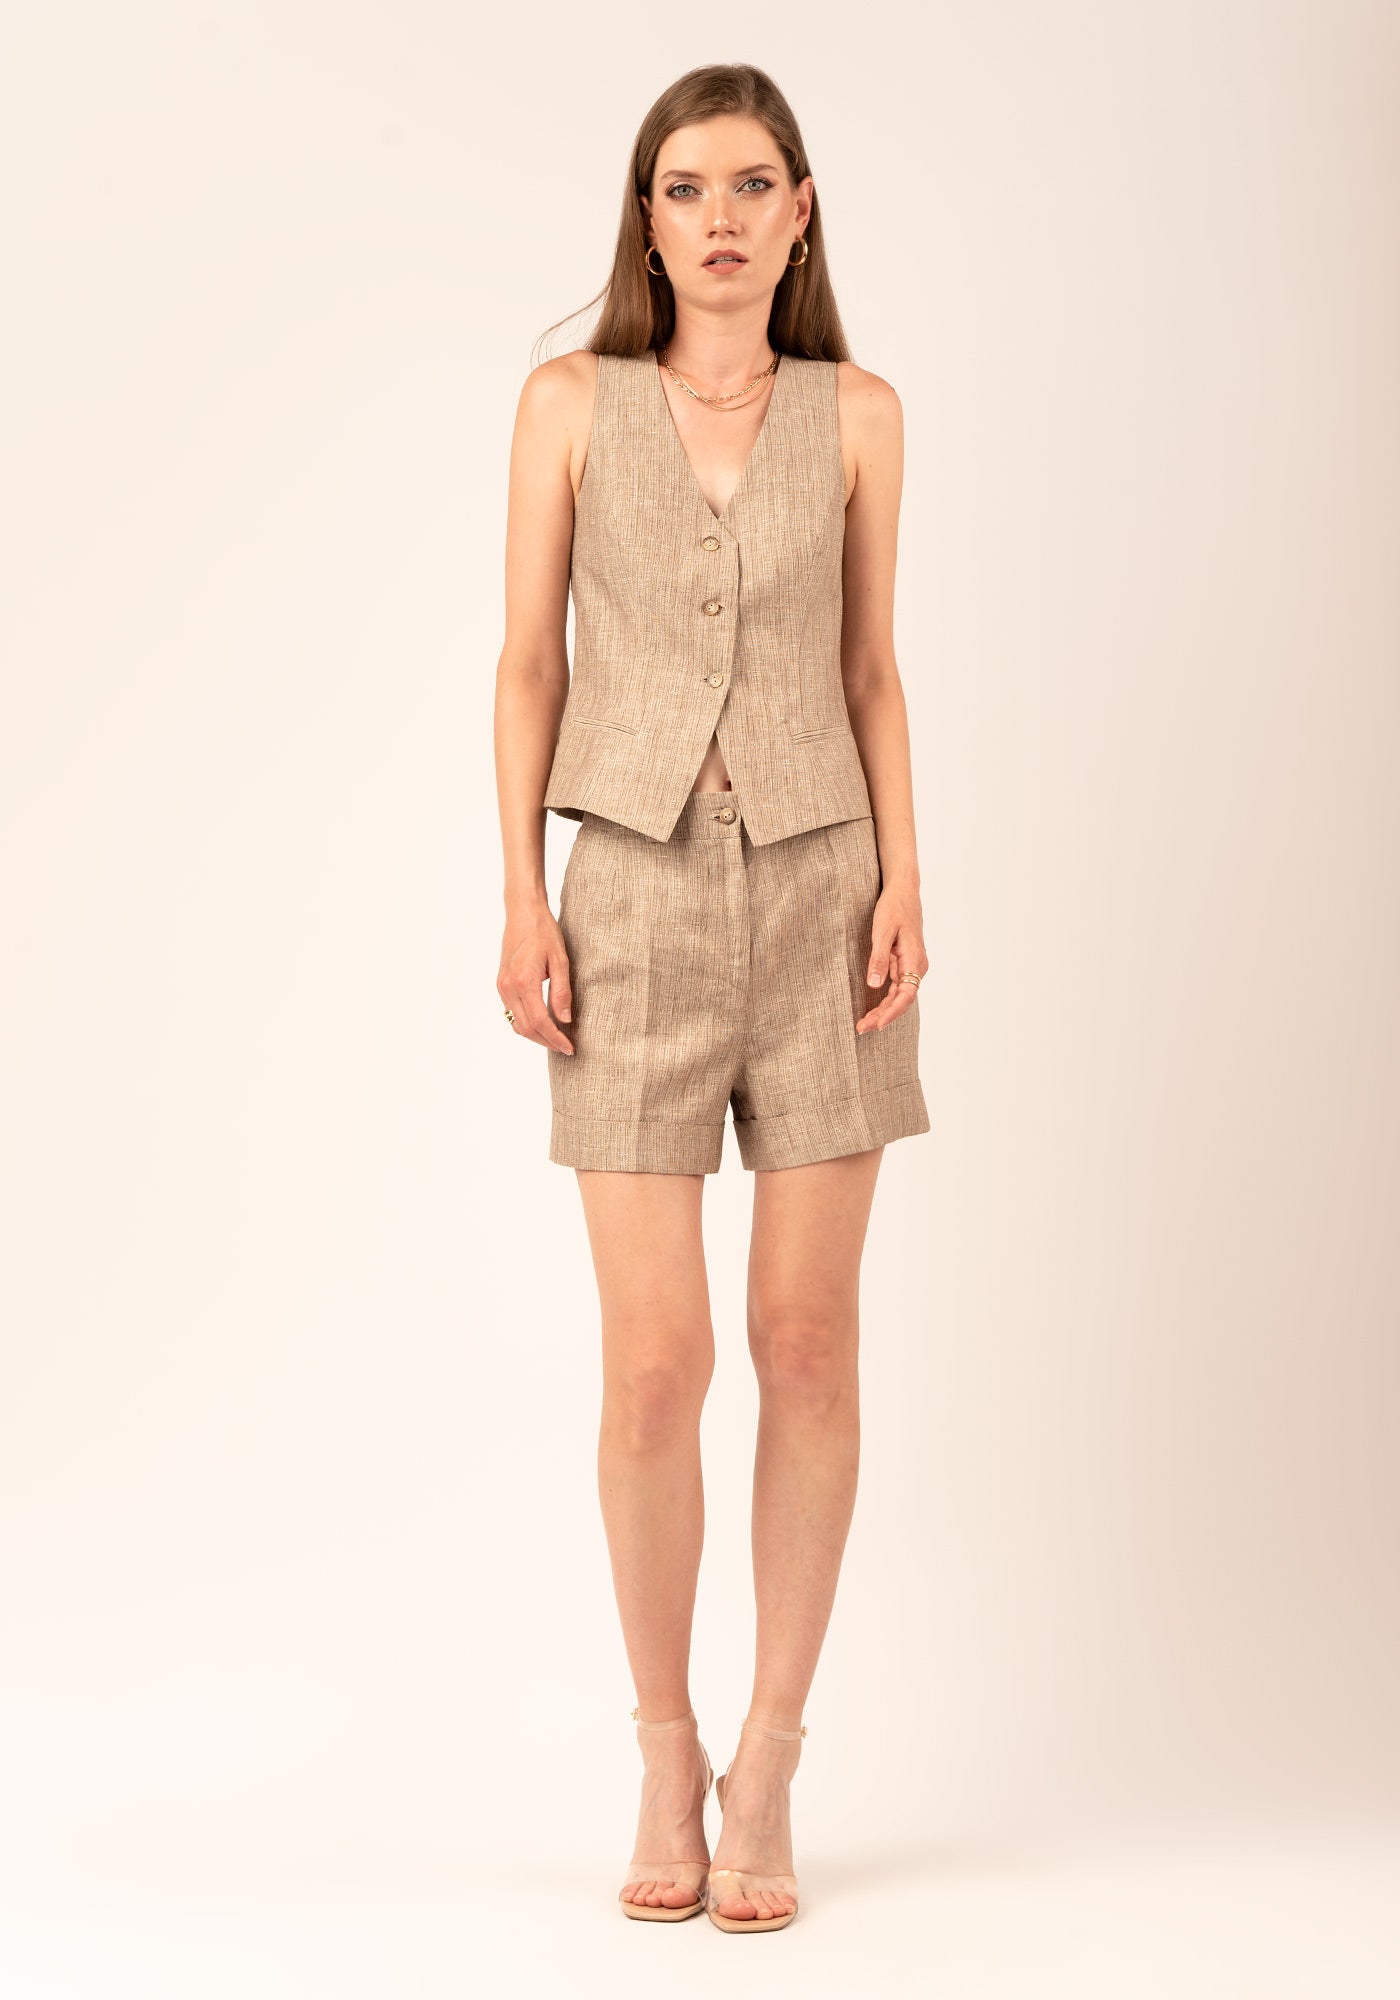 Women's High Waisted Linen Shorts in Beige with Gold Lamé